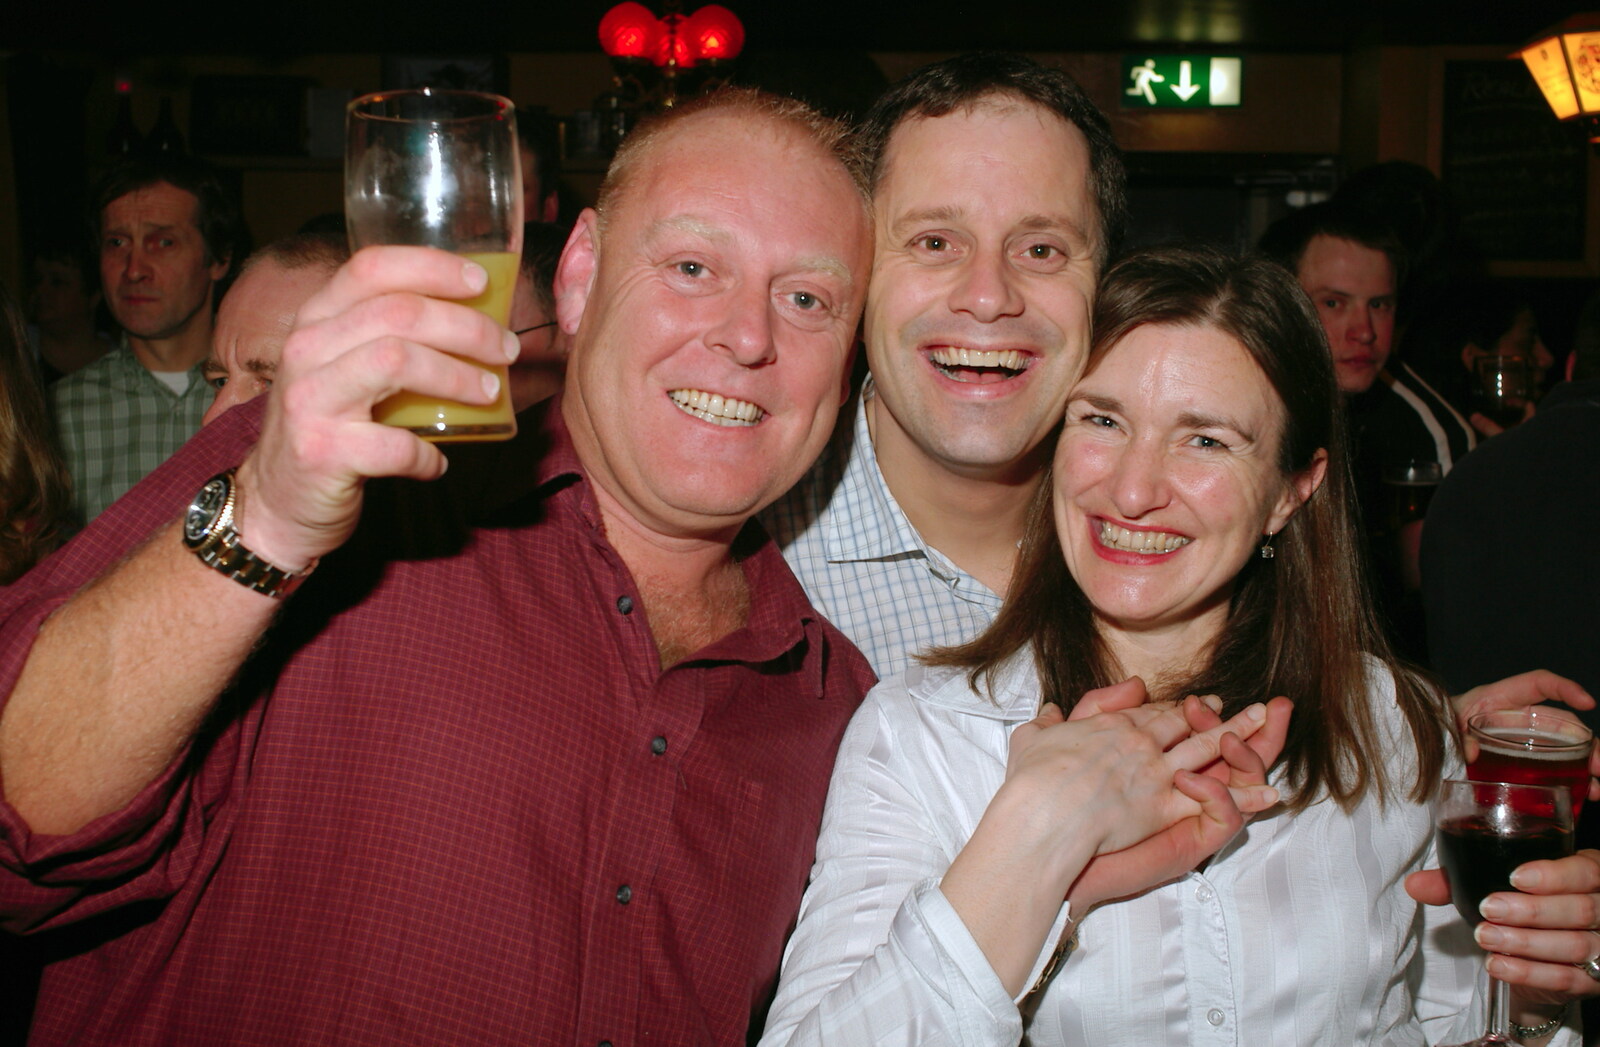 More cheers from Tsunami-Aid at the Greyhound, Botesdale, Suffolk - 5th February 2005